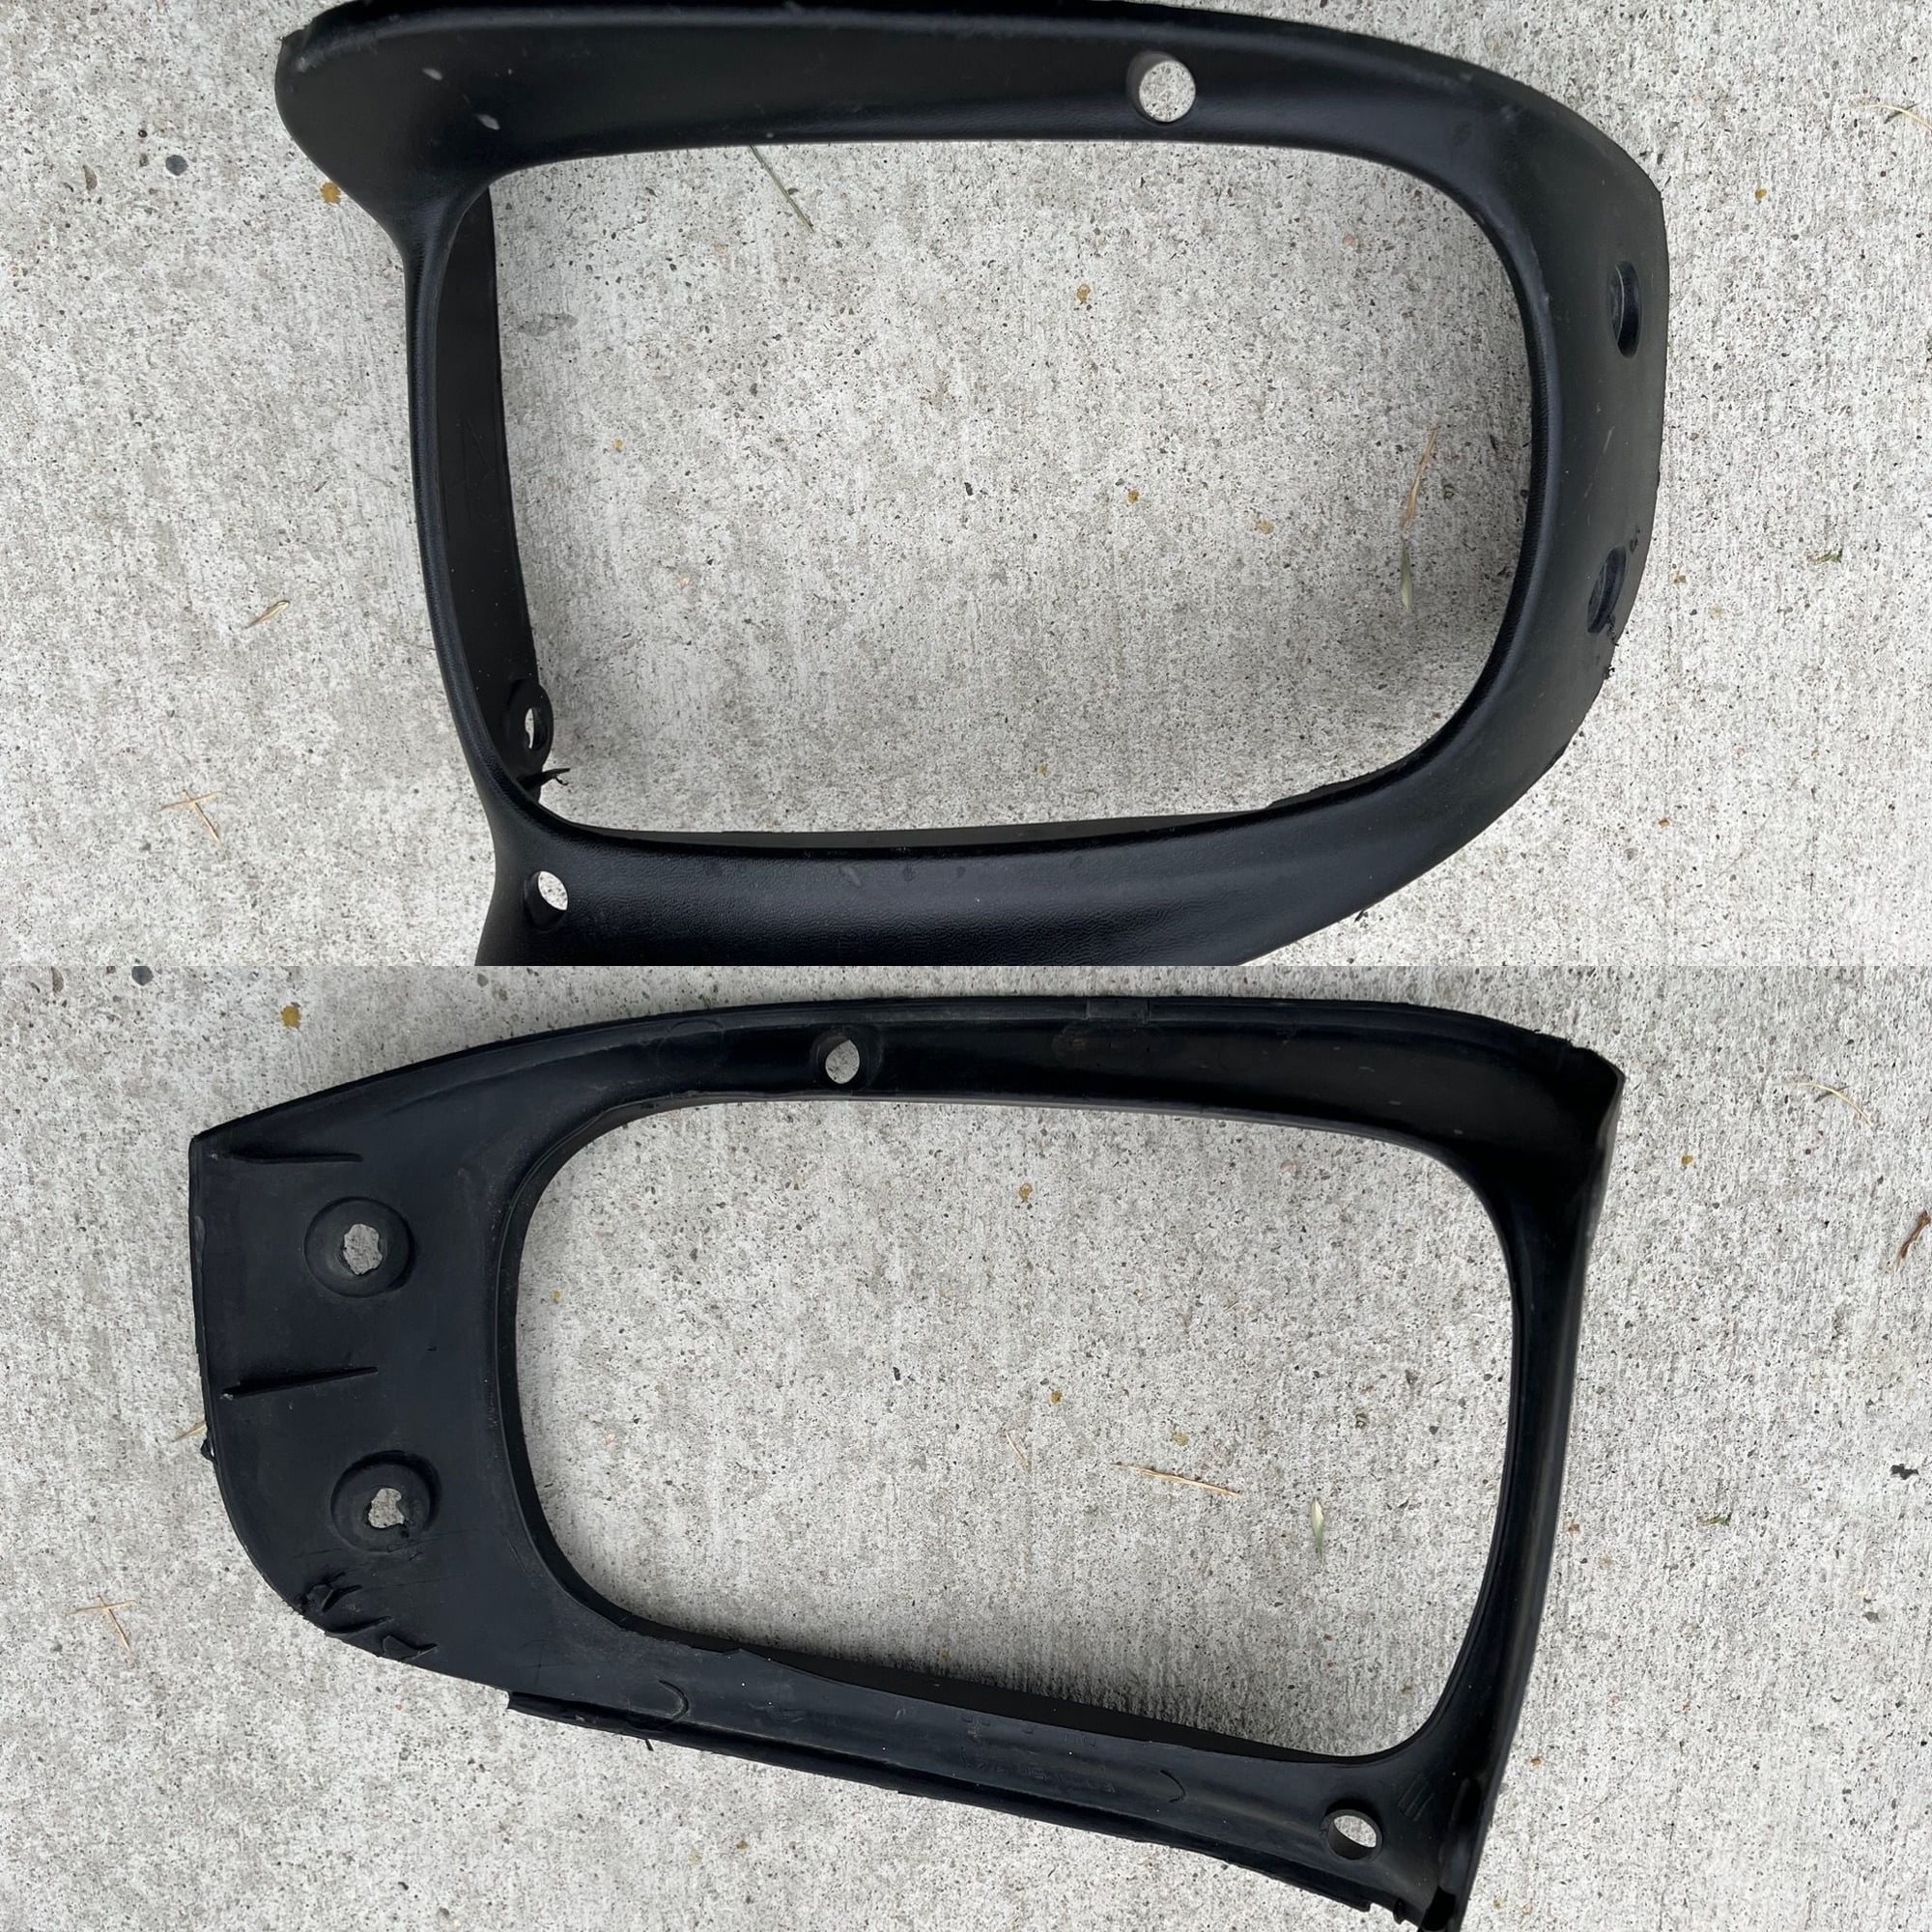 Exterior Body Parts - Headlight Bezel - LHD Driver's side(I think) - Used - 1992 to 2002 Mazda RX-7 - San Marcos, CA 92069, United States